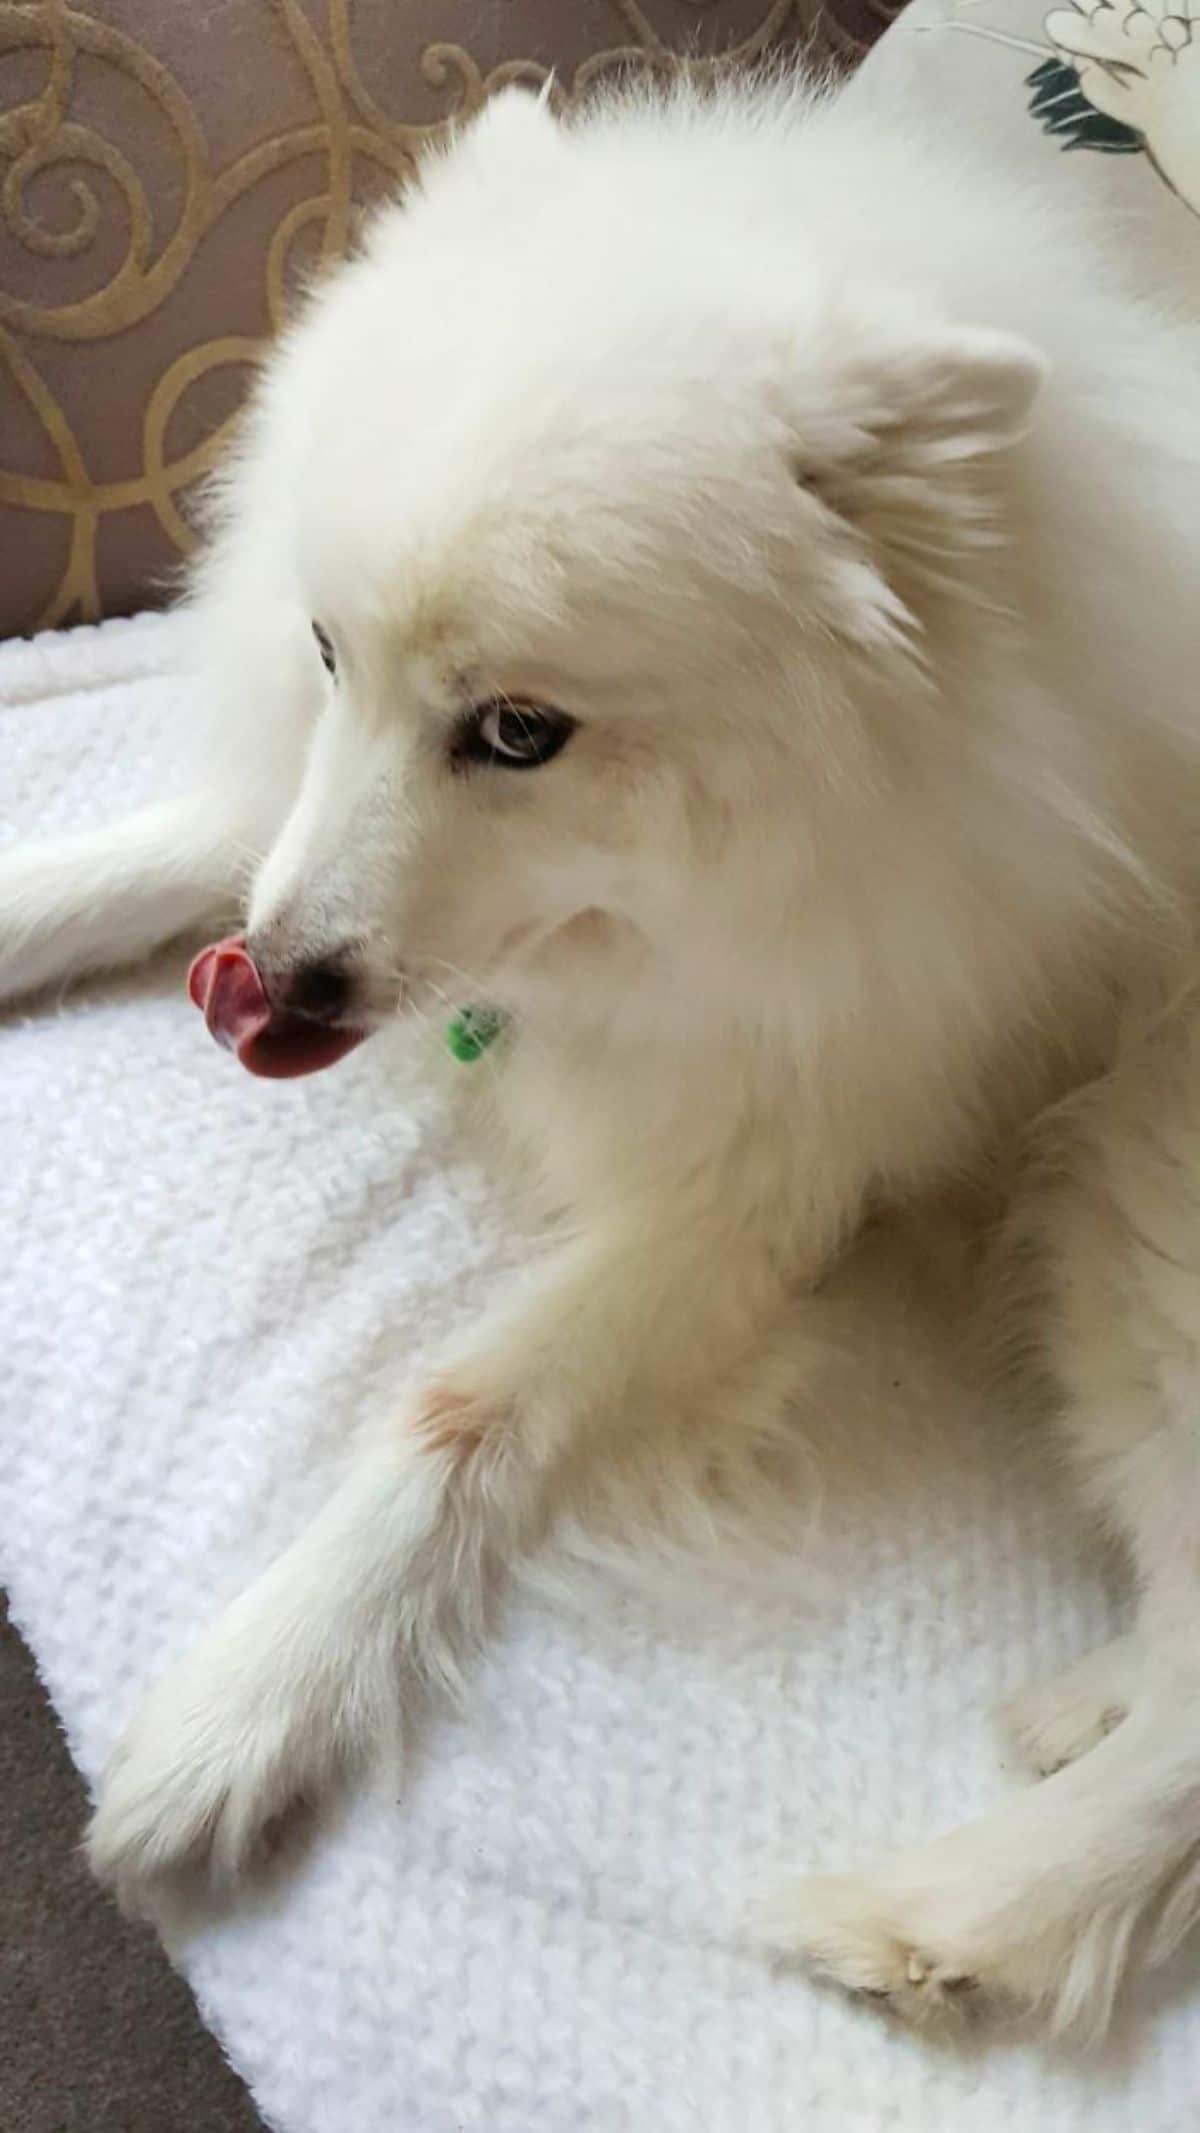 white fluffy dog licking its nose on a white blanket